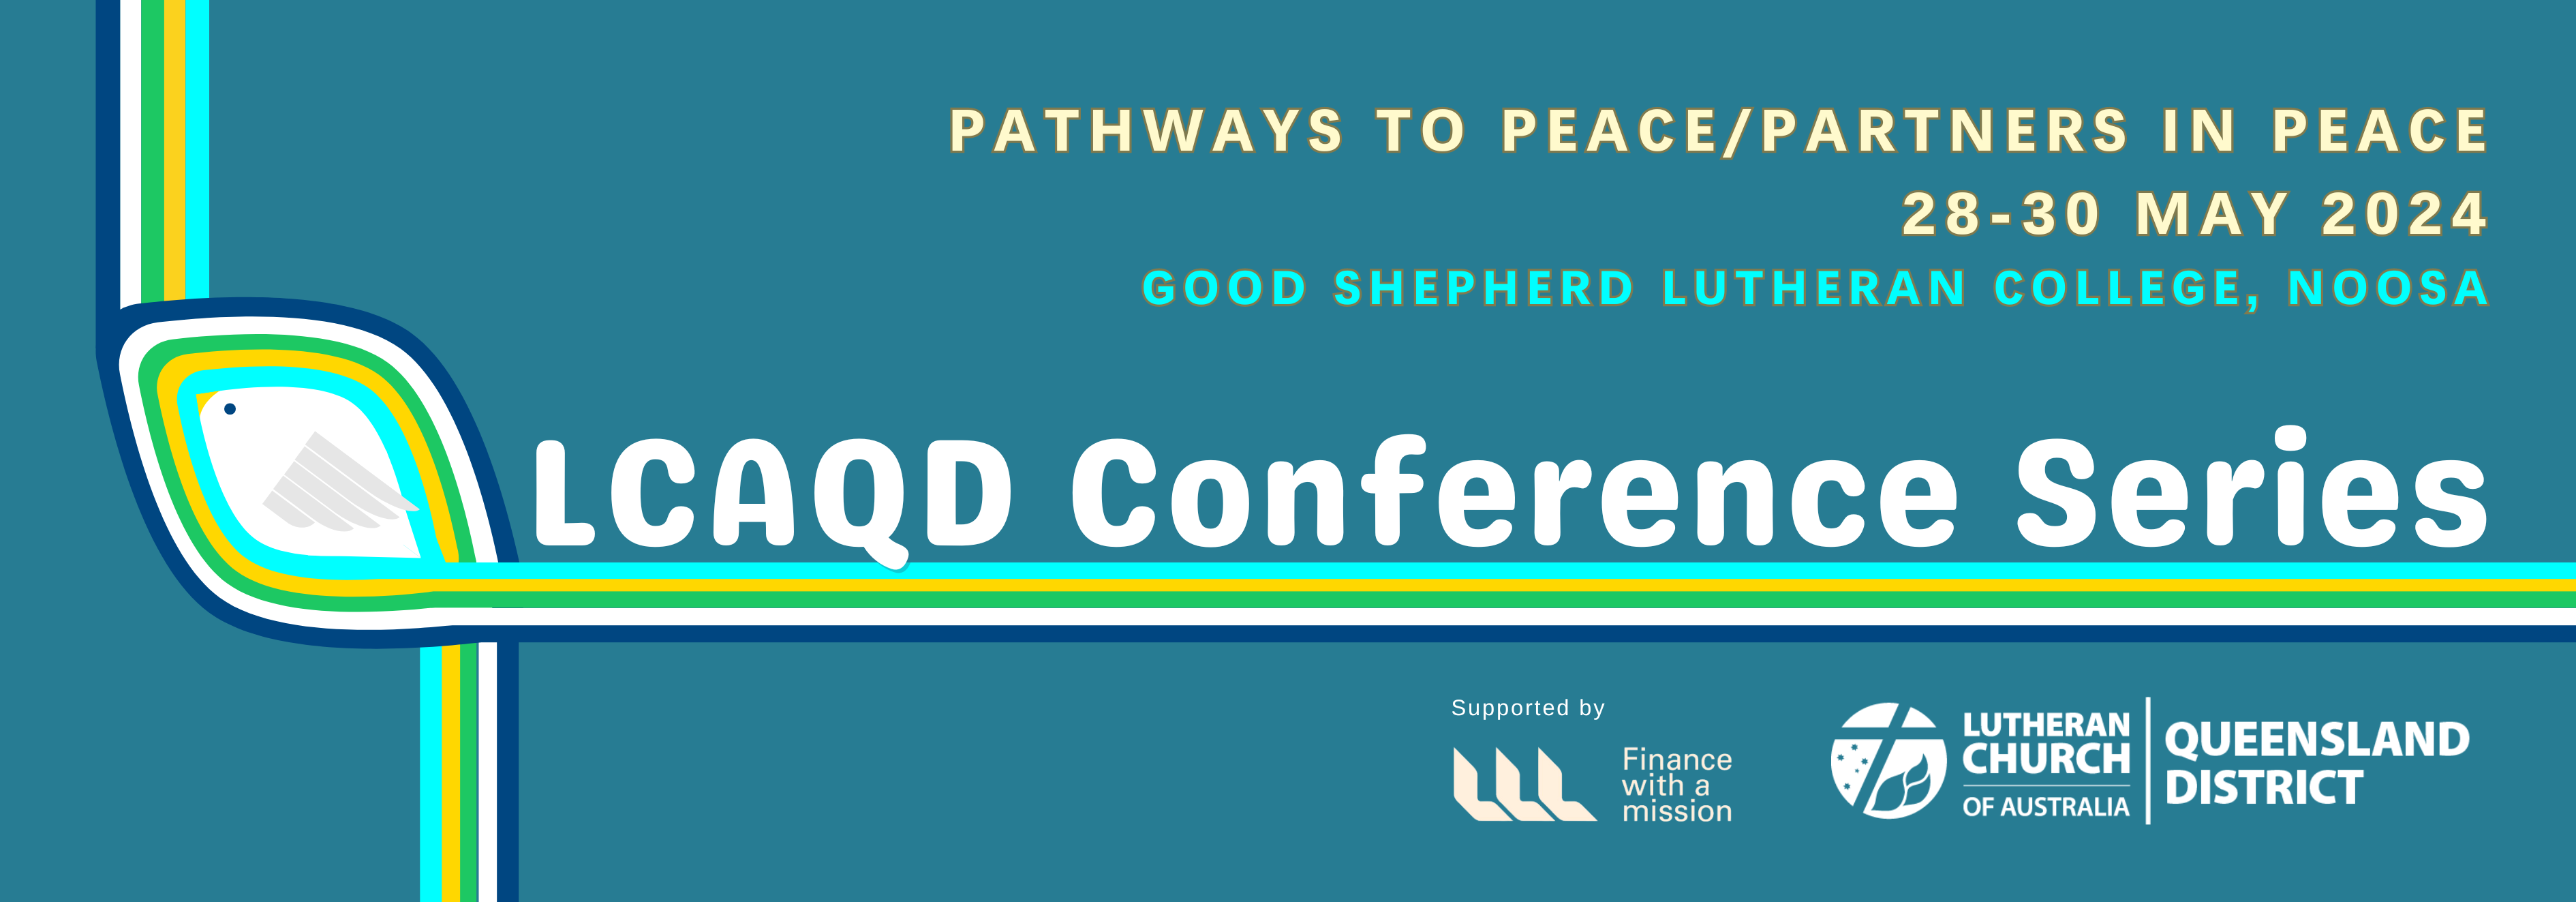 Pathways to Peace Web Banner (1)